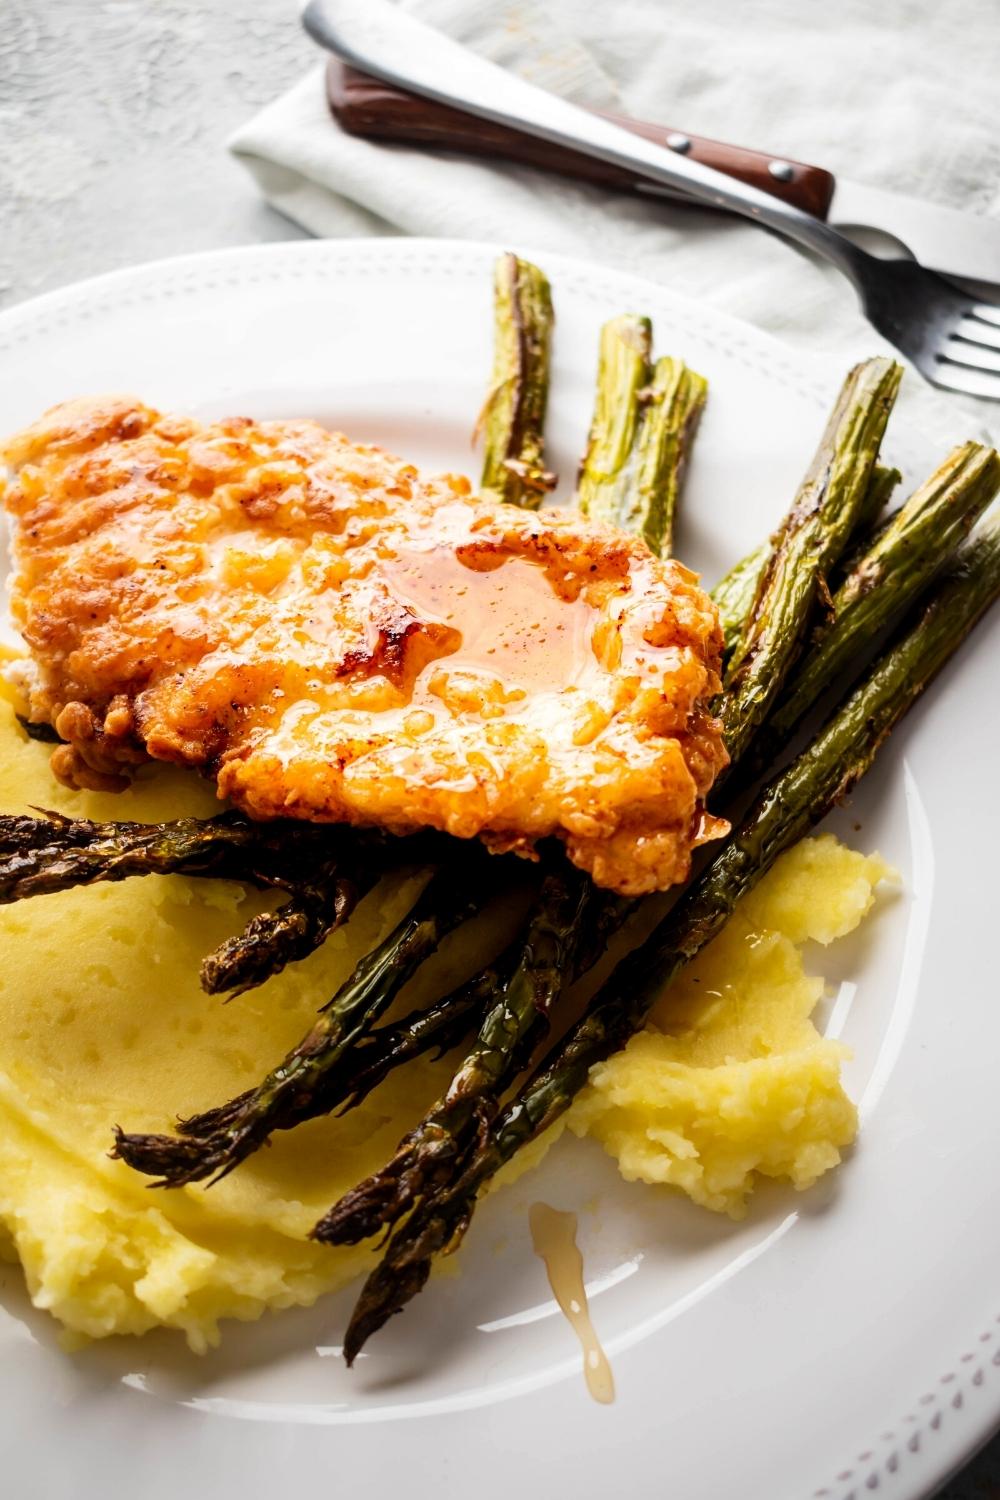 Truffle honey on top of a piece of breaded chicken that is an asparagus spears on mashed potatoes on a white plate.